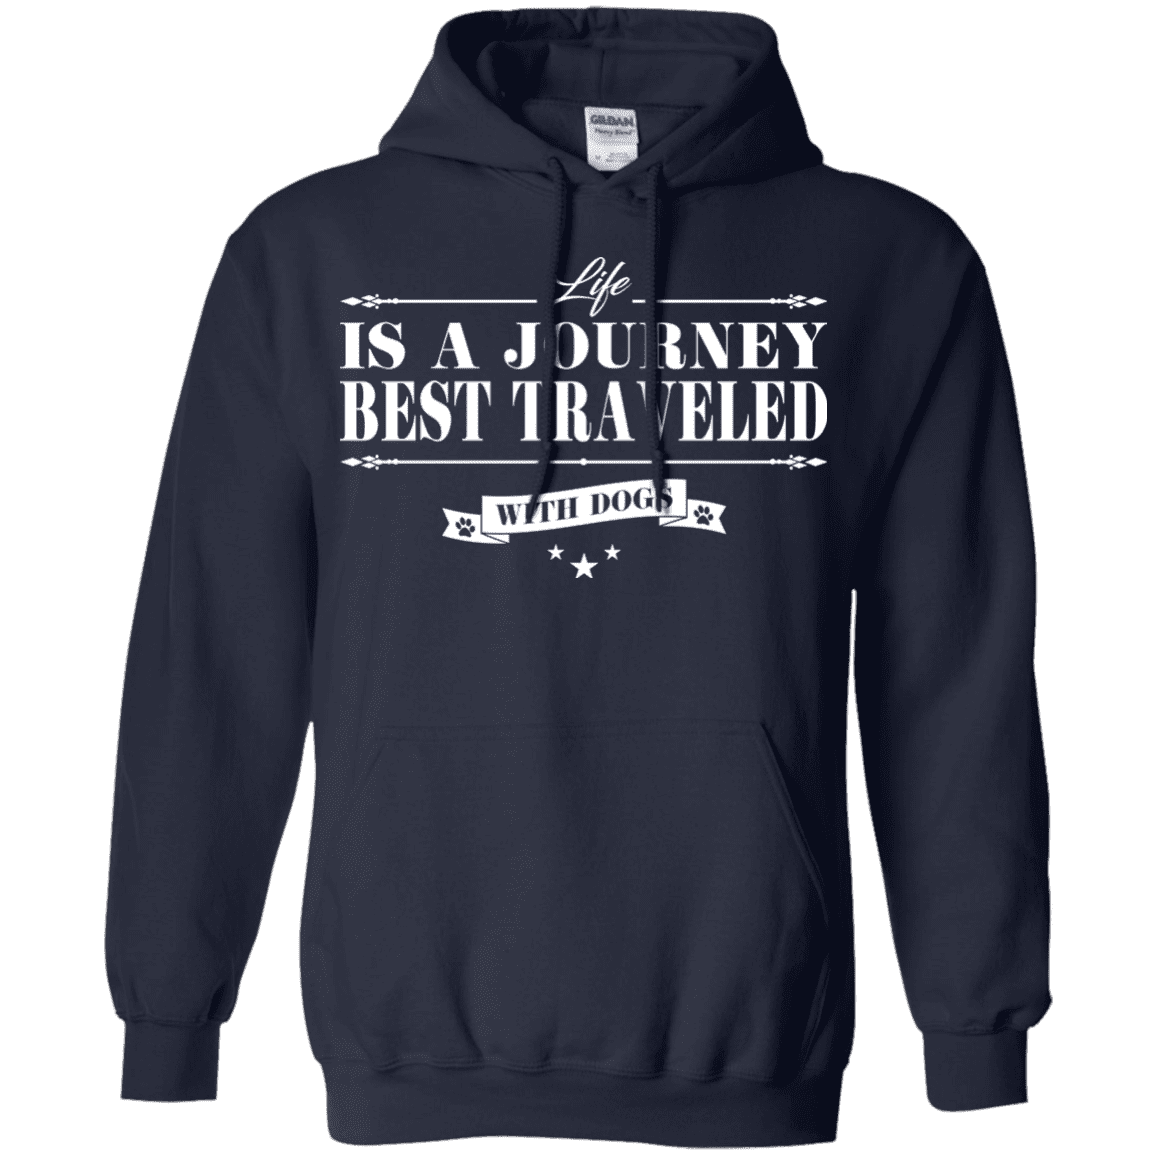 Life Is a Journey Best Travelled With Dogs - Hoodie.